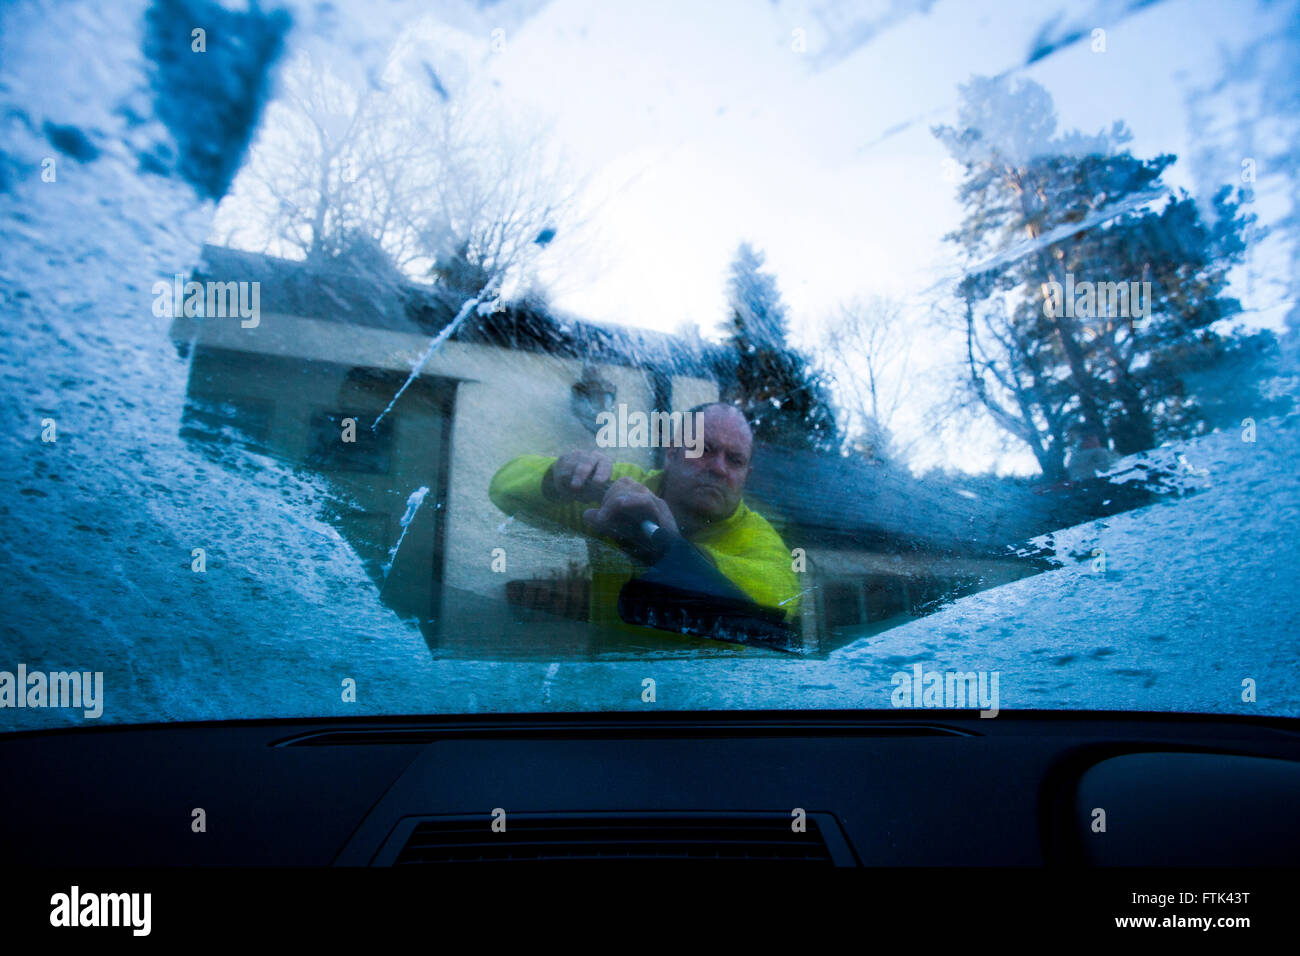 https://c8.alamy.com/comp/FTK43T/person-scraping-ice-off-windscreen-with-camera-placed-inside-car-looking-FTK43T.jpg